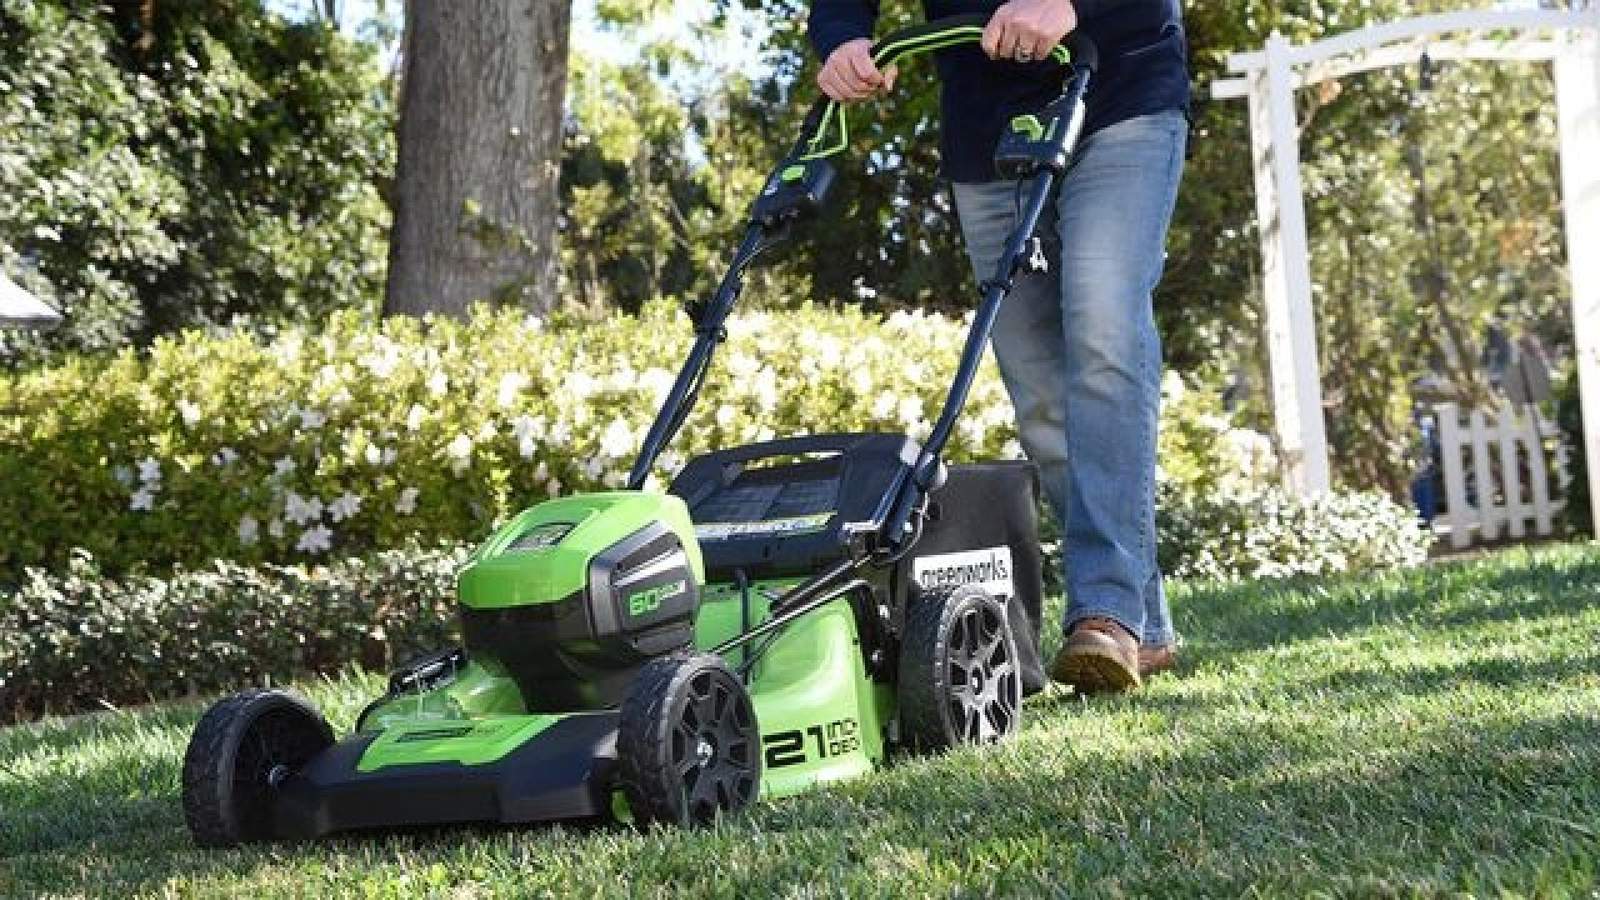 Do these things now to keep your lawn looking green and lush year-round